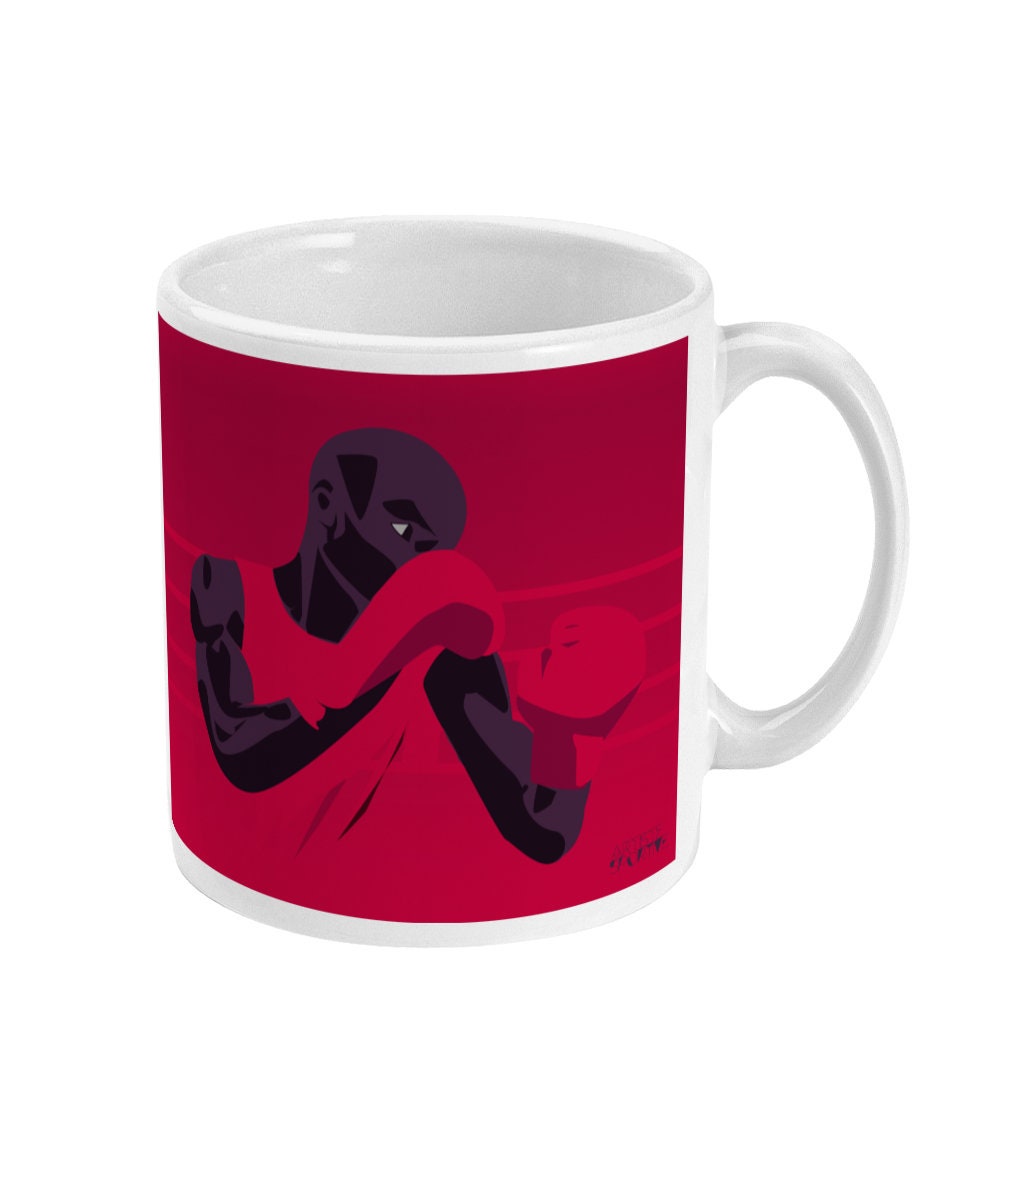 Boxing/boxing cup or mug "The red boxer" - Customizable